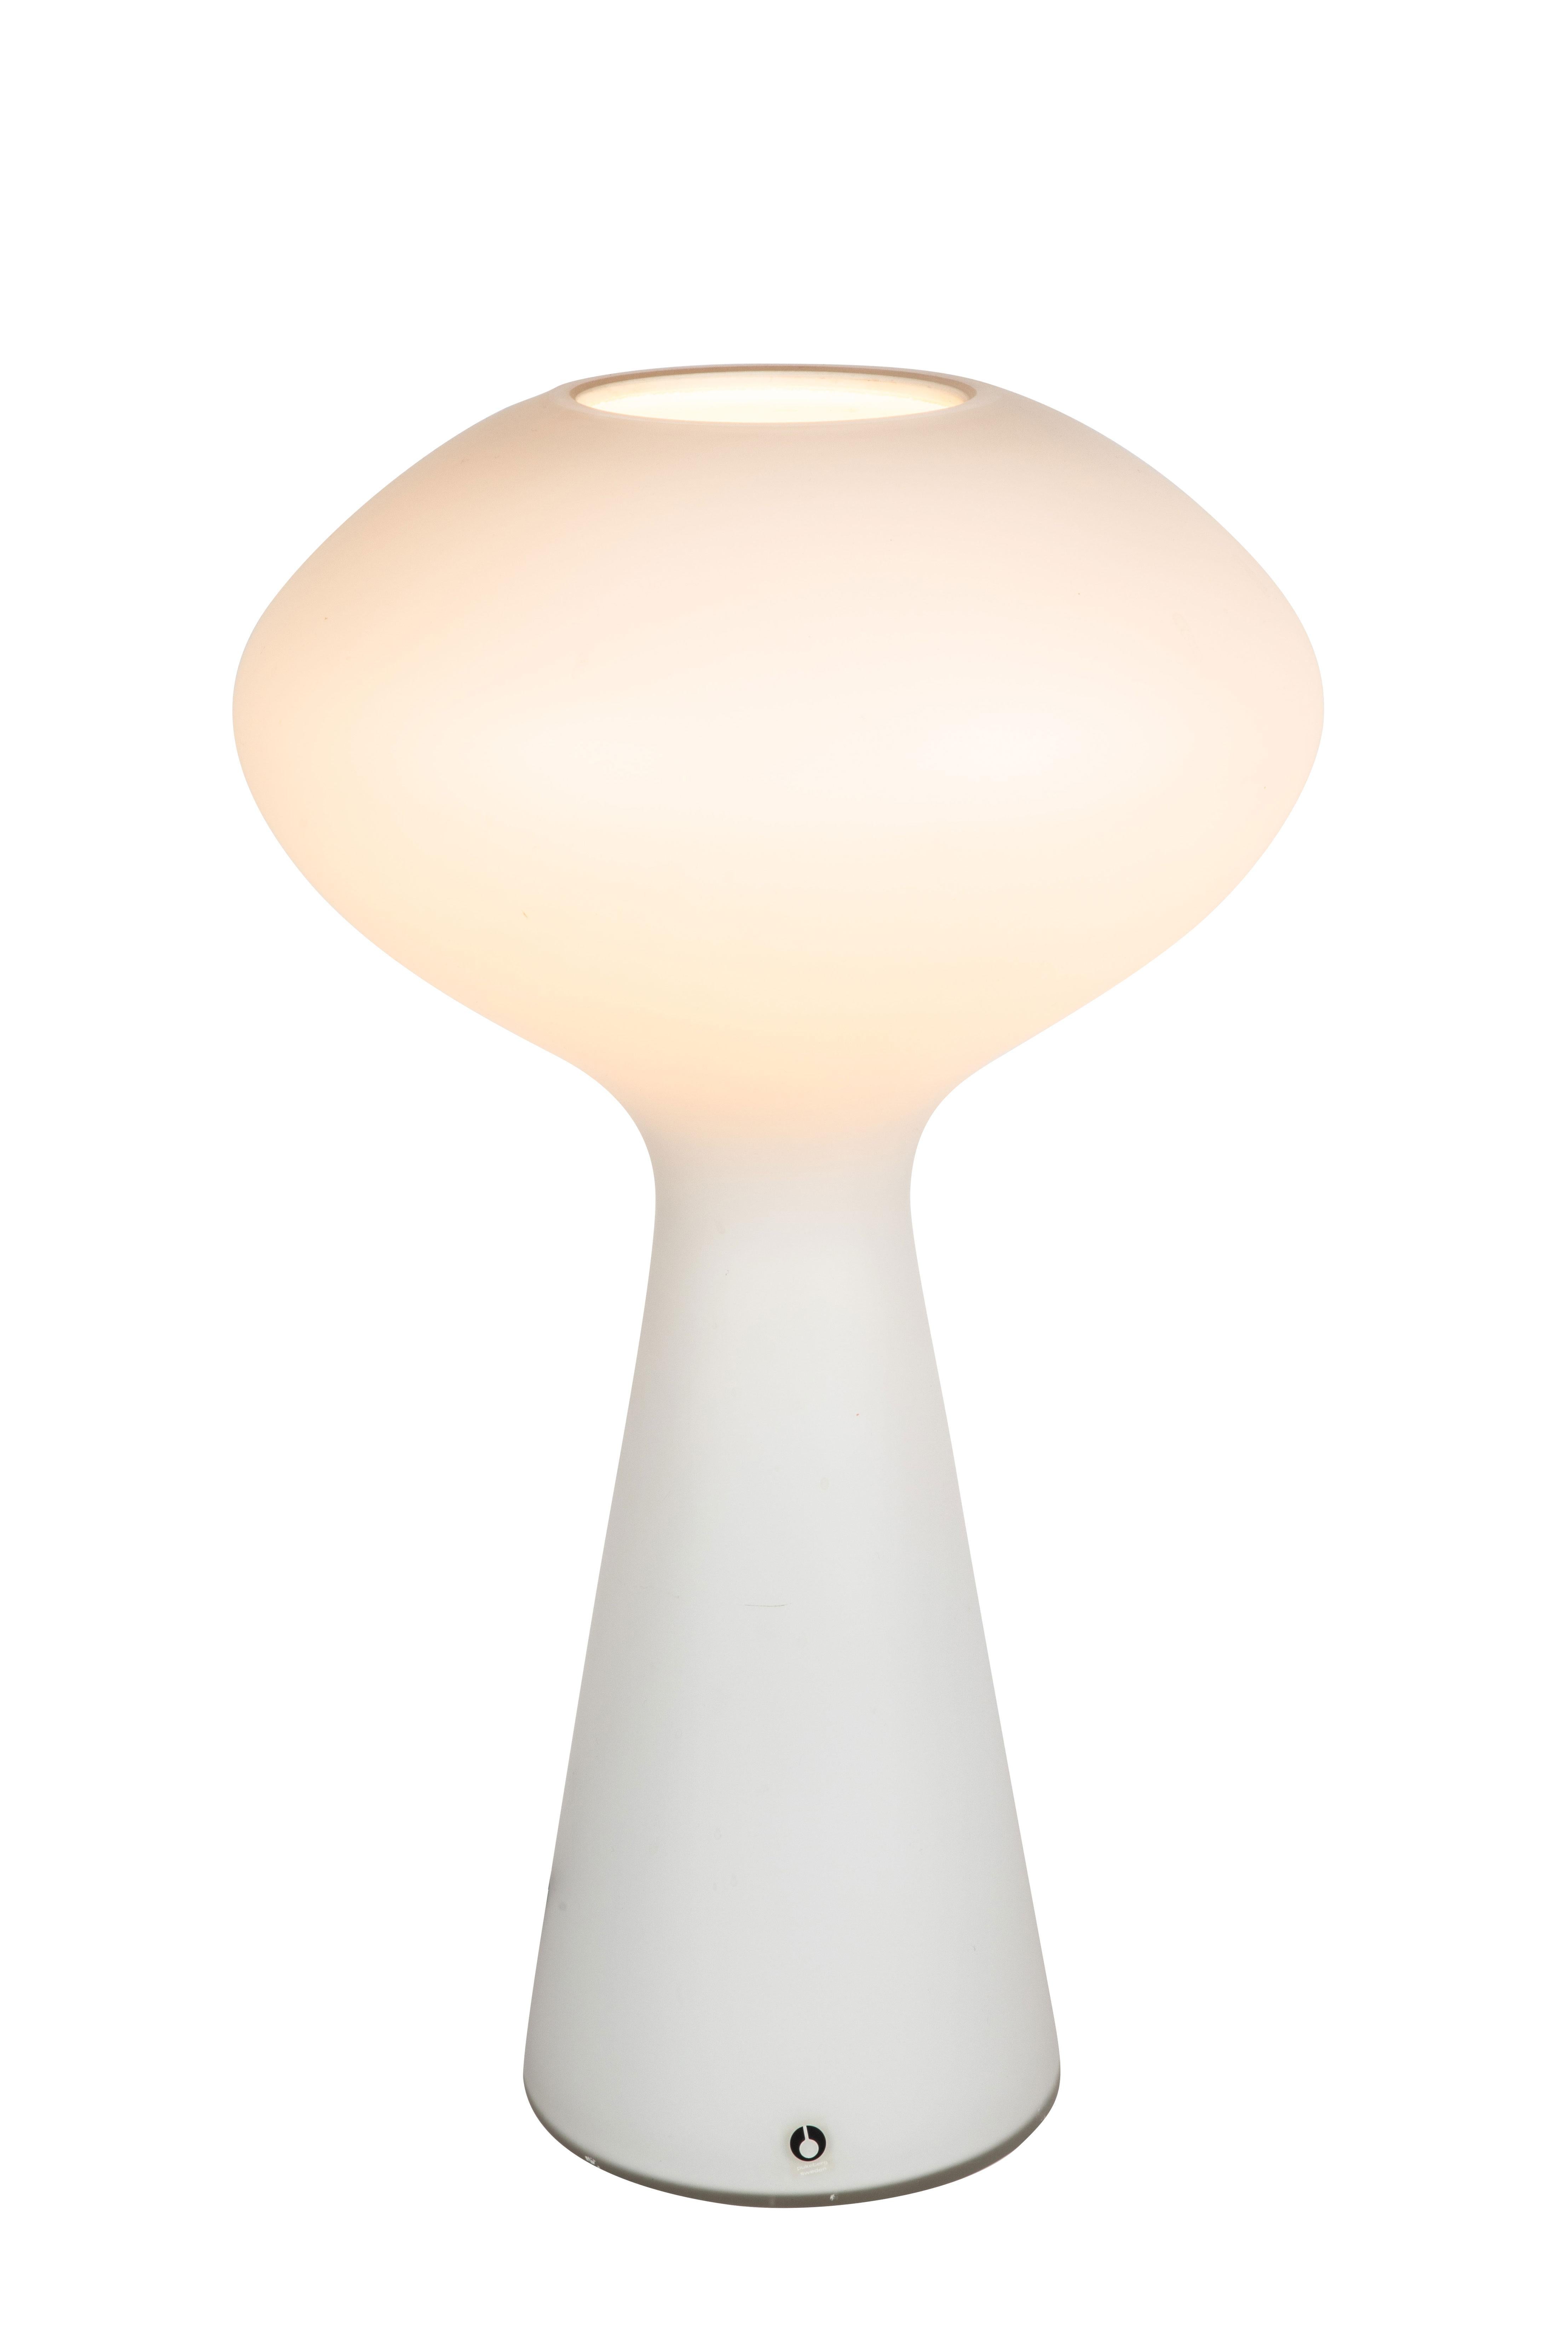 Pair of 1950s Lisa Johansson-Pape table lamps for Iittala. Comprised of a sculptural single piece of mold-blown, sandblasted and acid-etched opaline glass made in Finland, circa 1954. Retain original manufacturer's label. A contemporary of Paavo